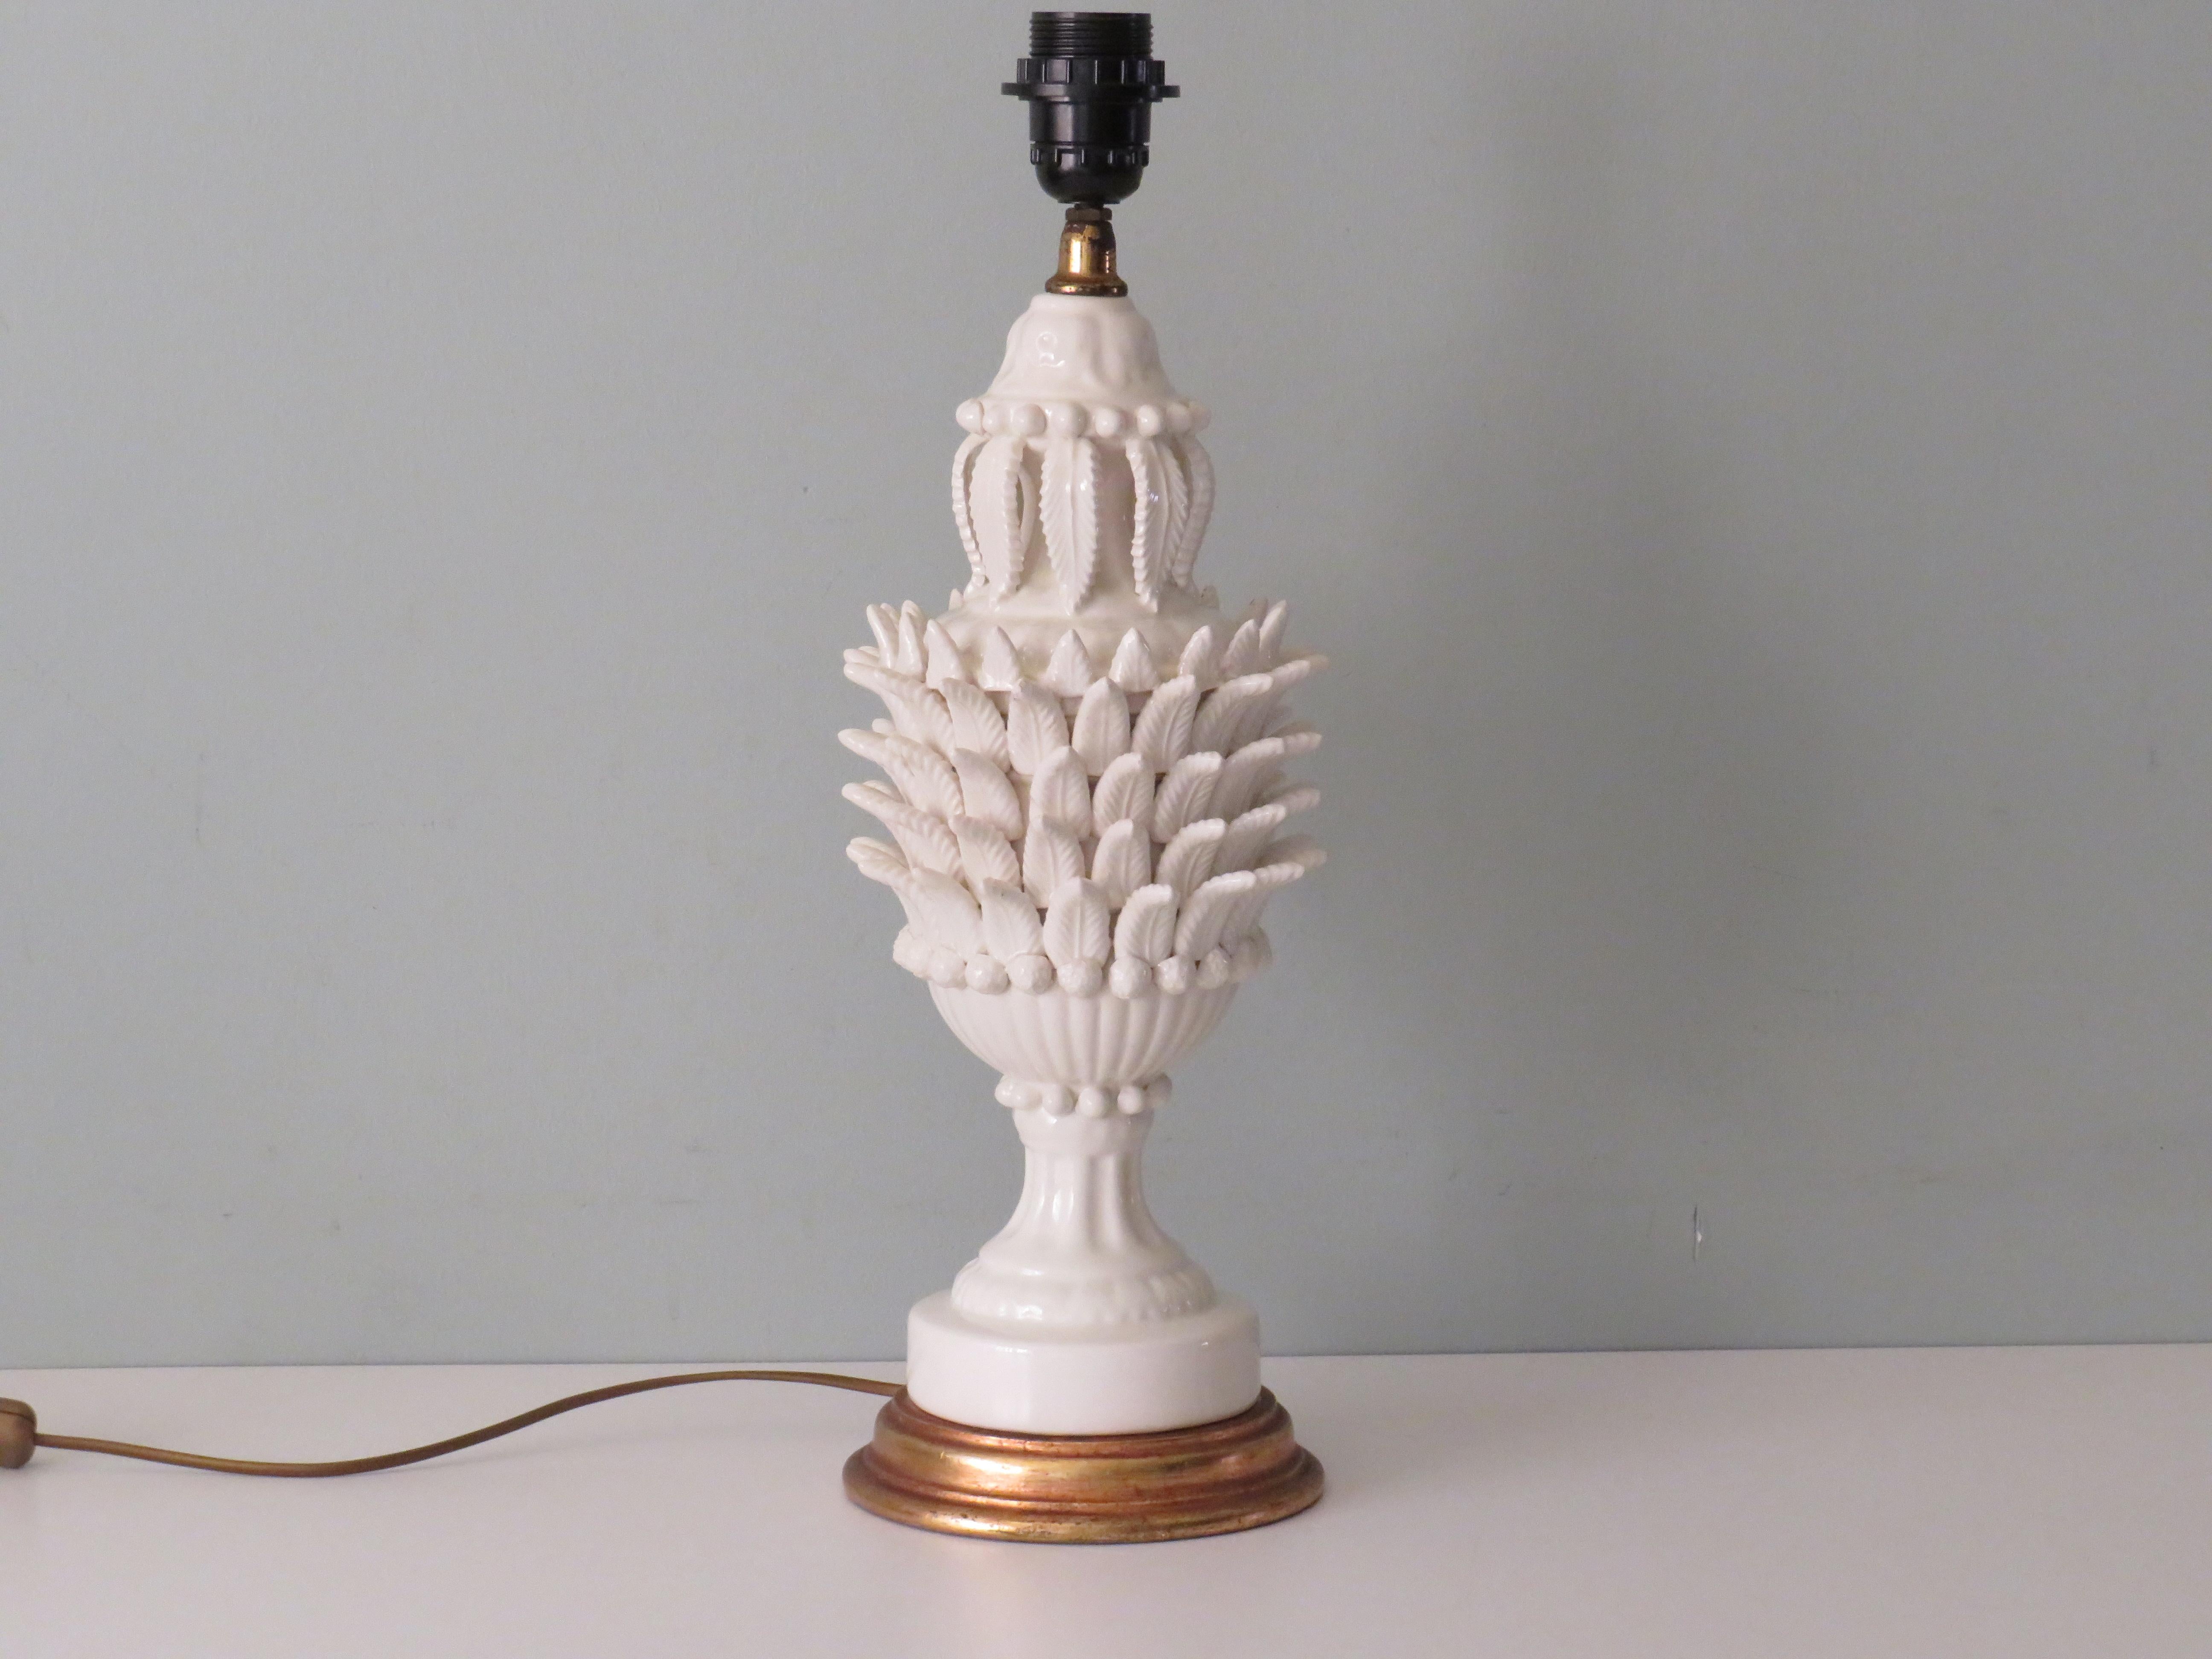 Beautifully detailed lamp base by Bondia Manises in white glazed ceramic on a gilded wooden base.
Measures: Height: 49 cm max. Diameter: 15 cm.
The lamp has an E 27 fitting and a fully gold-colored wiring with on and off button.
The lamp base is